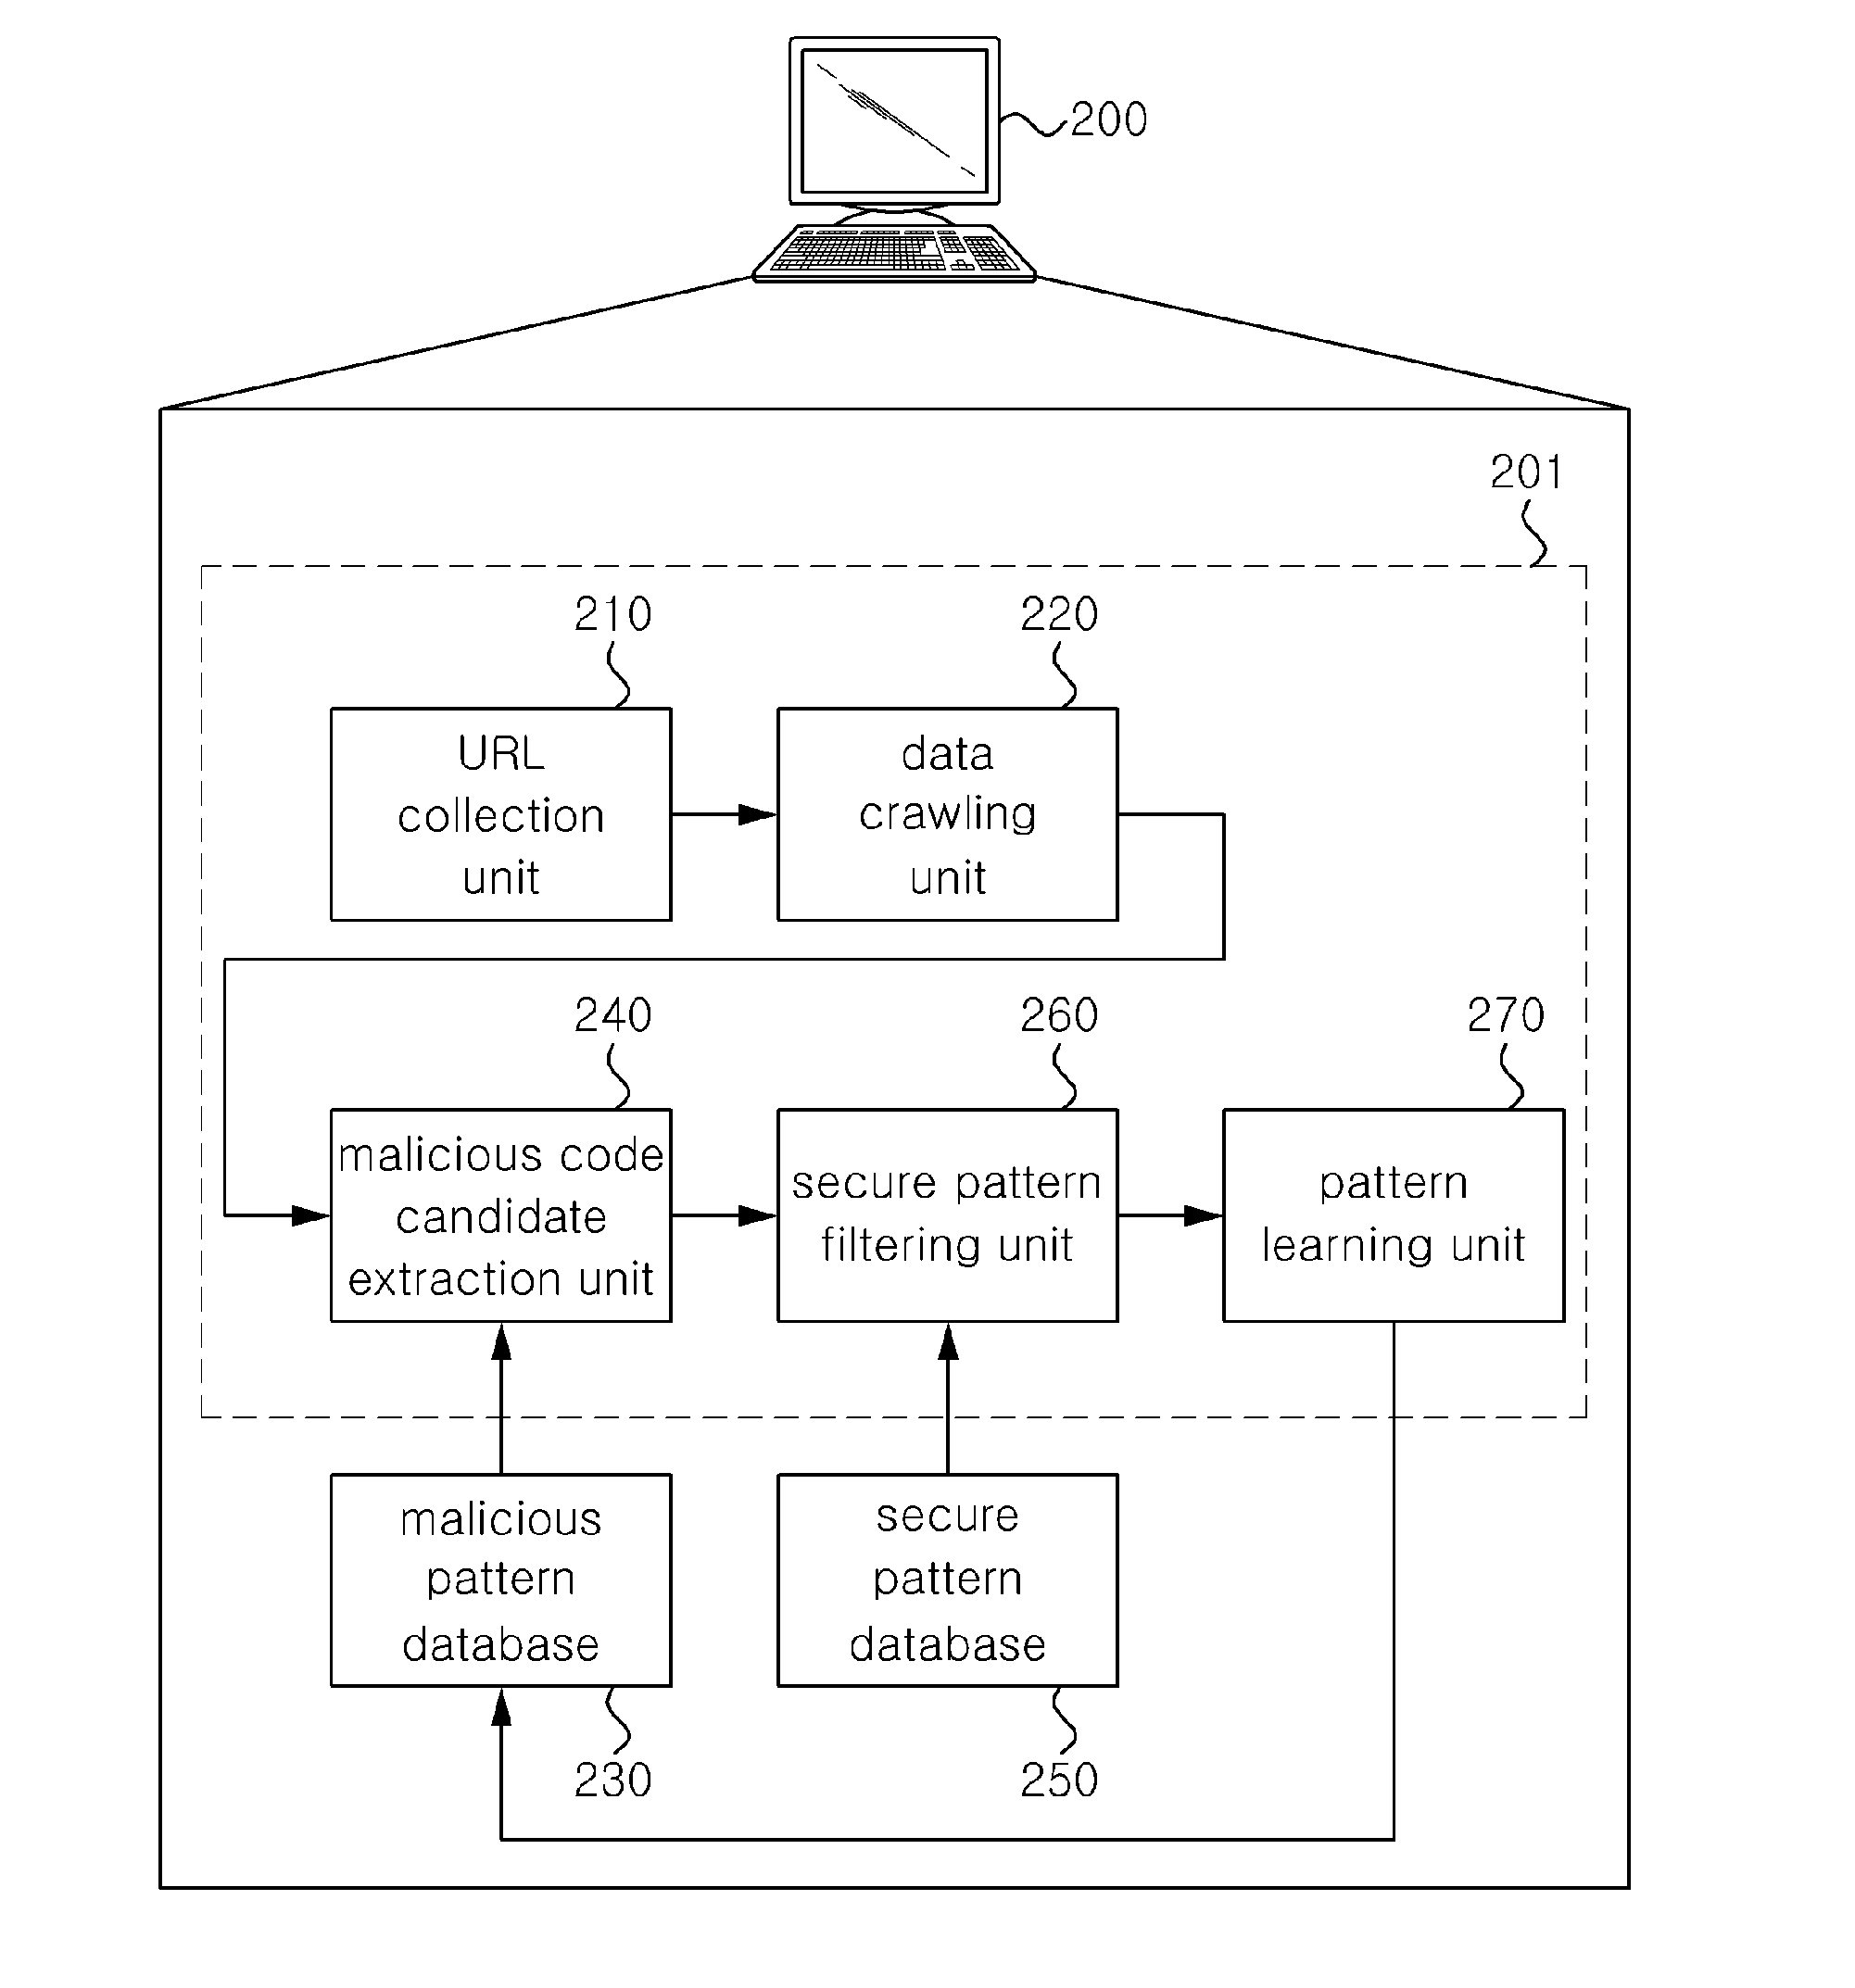 System and method for detecting malicious code based on web